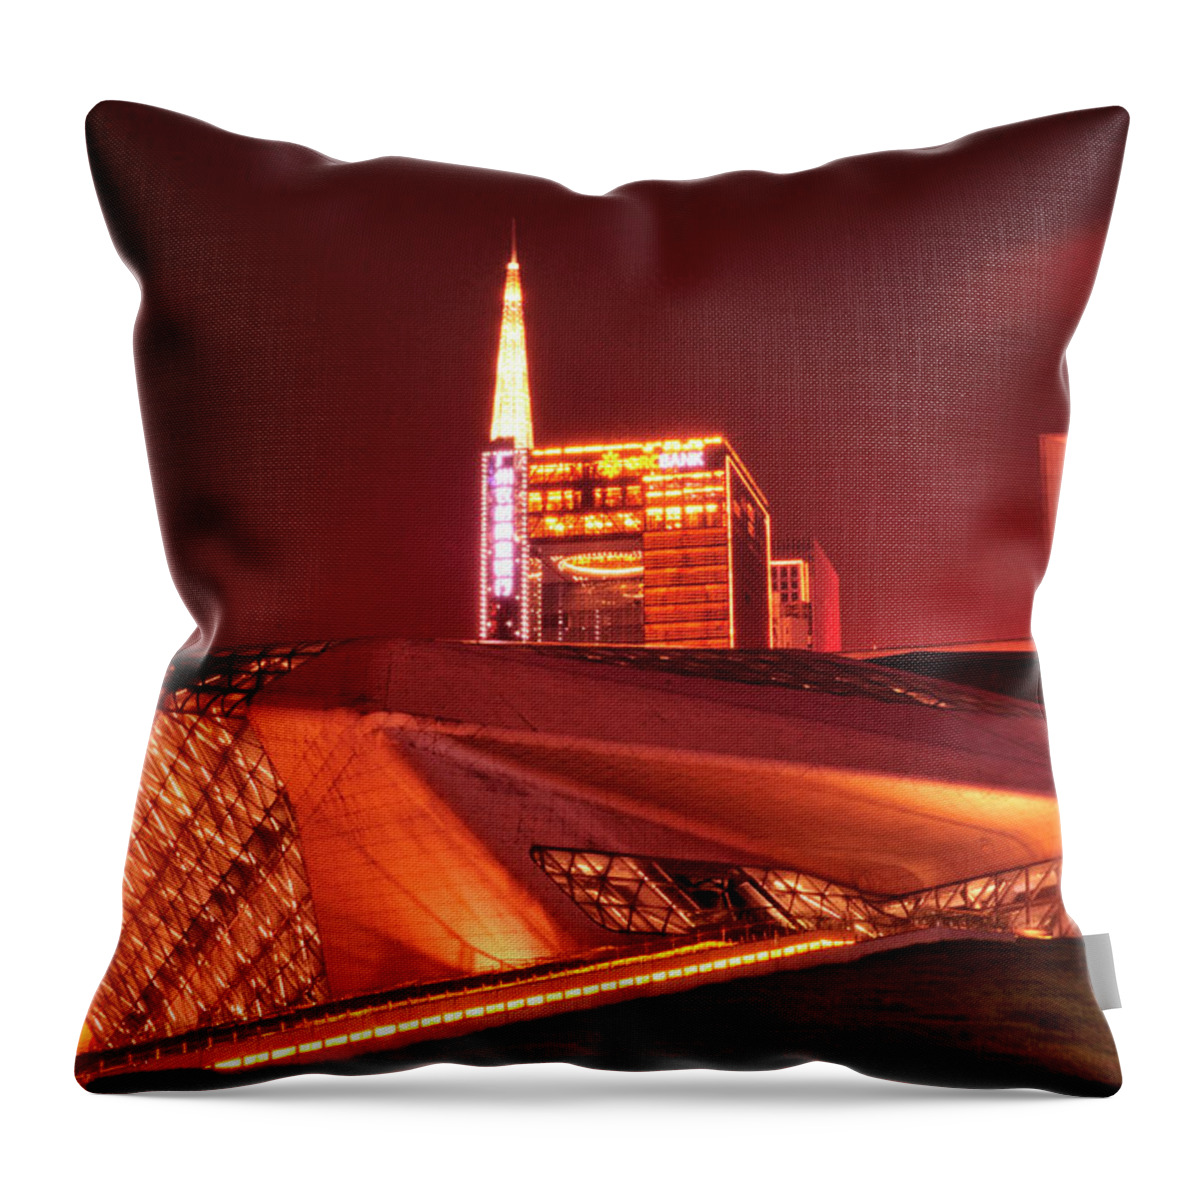 Chinese Culture Throw Pillow featuring the photograph Guangzhou Opera House by Huang Xin